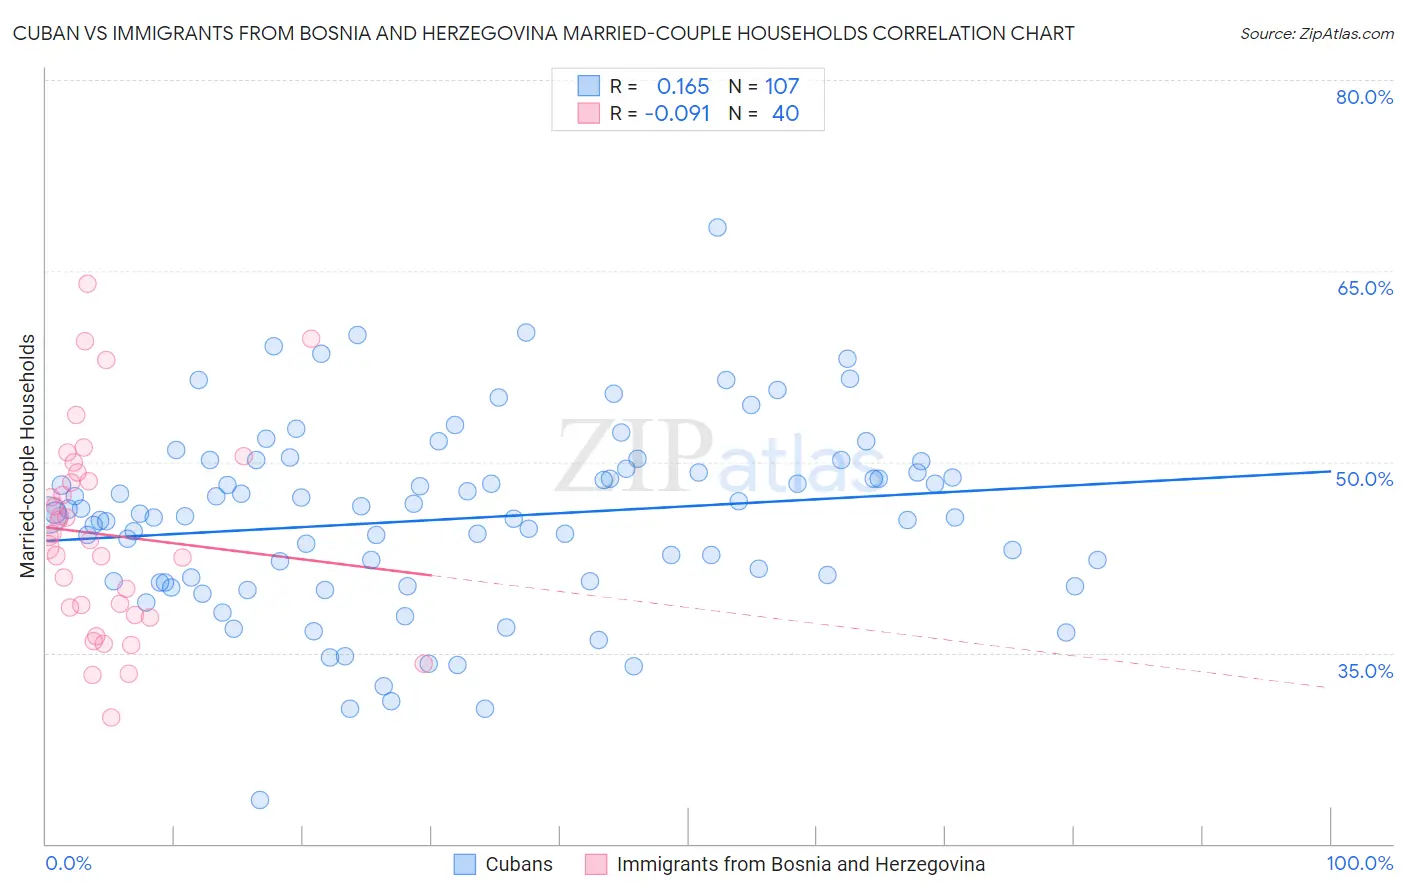 Cuban vs Immigrants from Bosnia and Herzegovina Married-couple Households